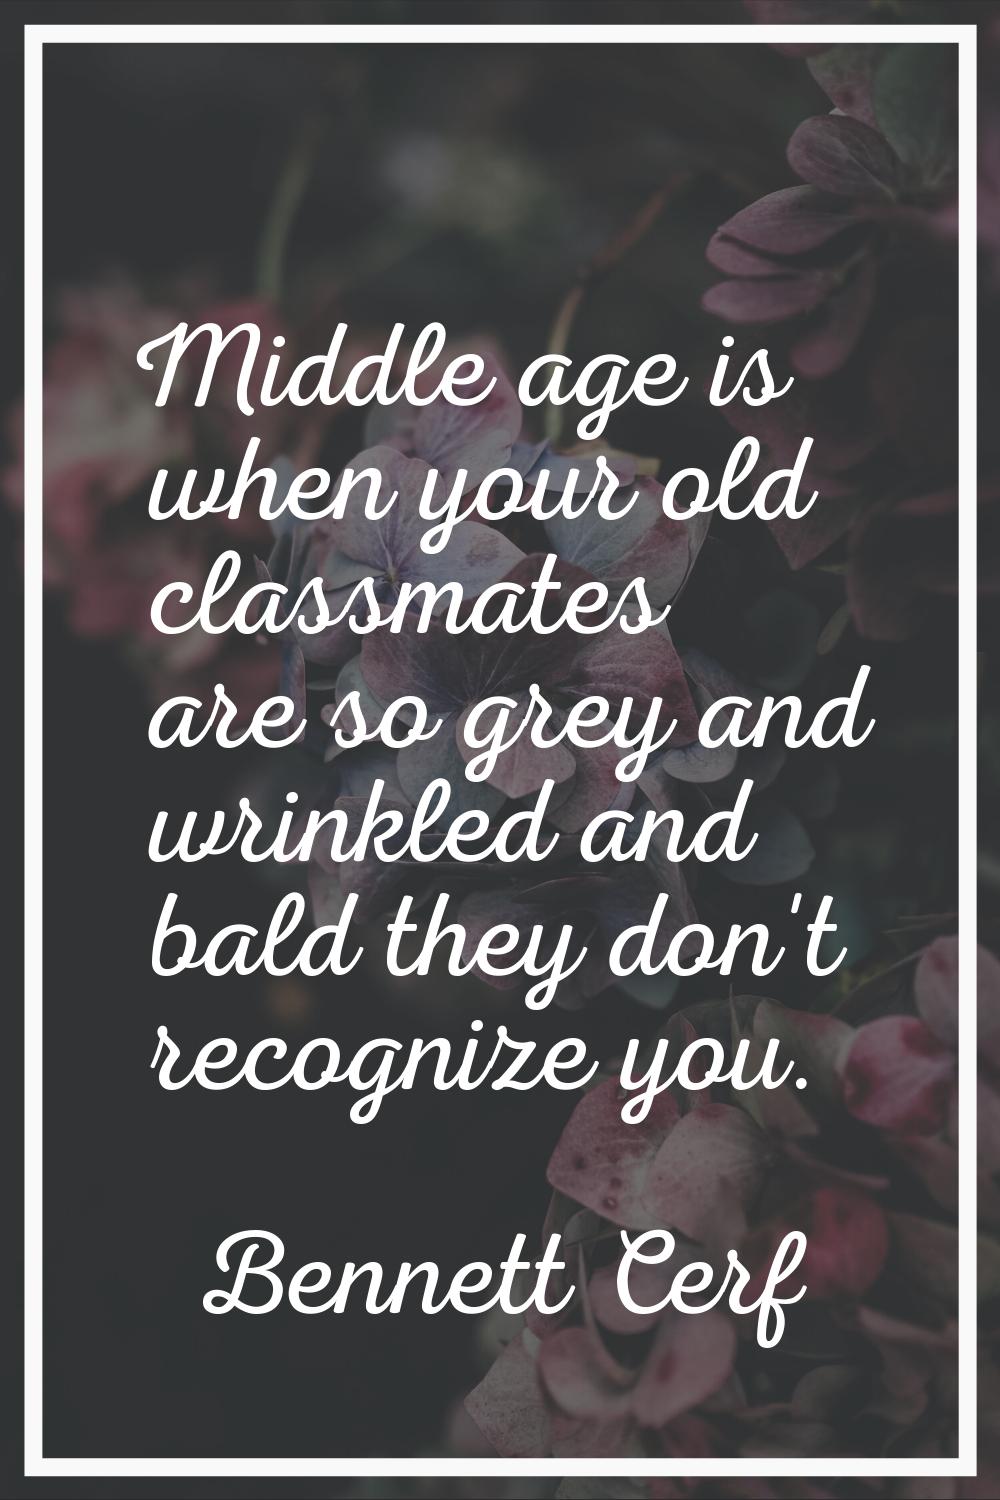 Middle age is when your old classmates are so grey and wrinkled and bald they don't recognize you.